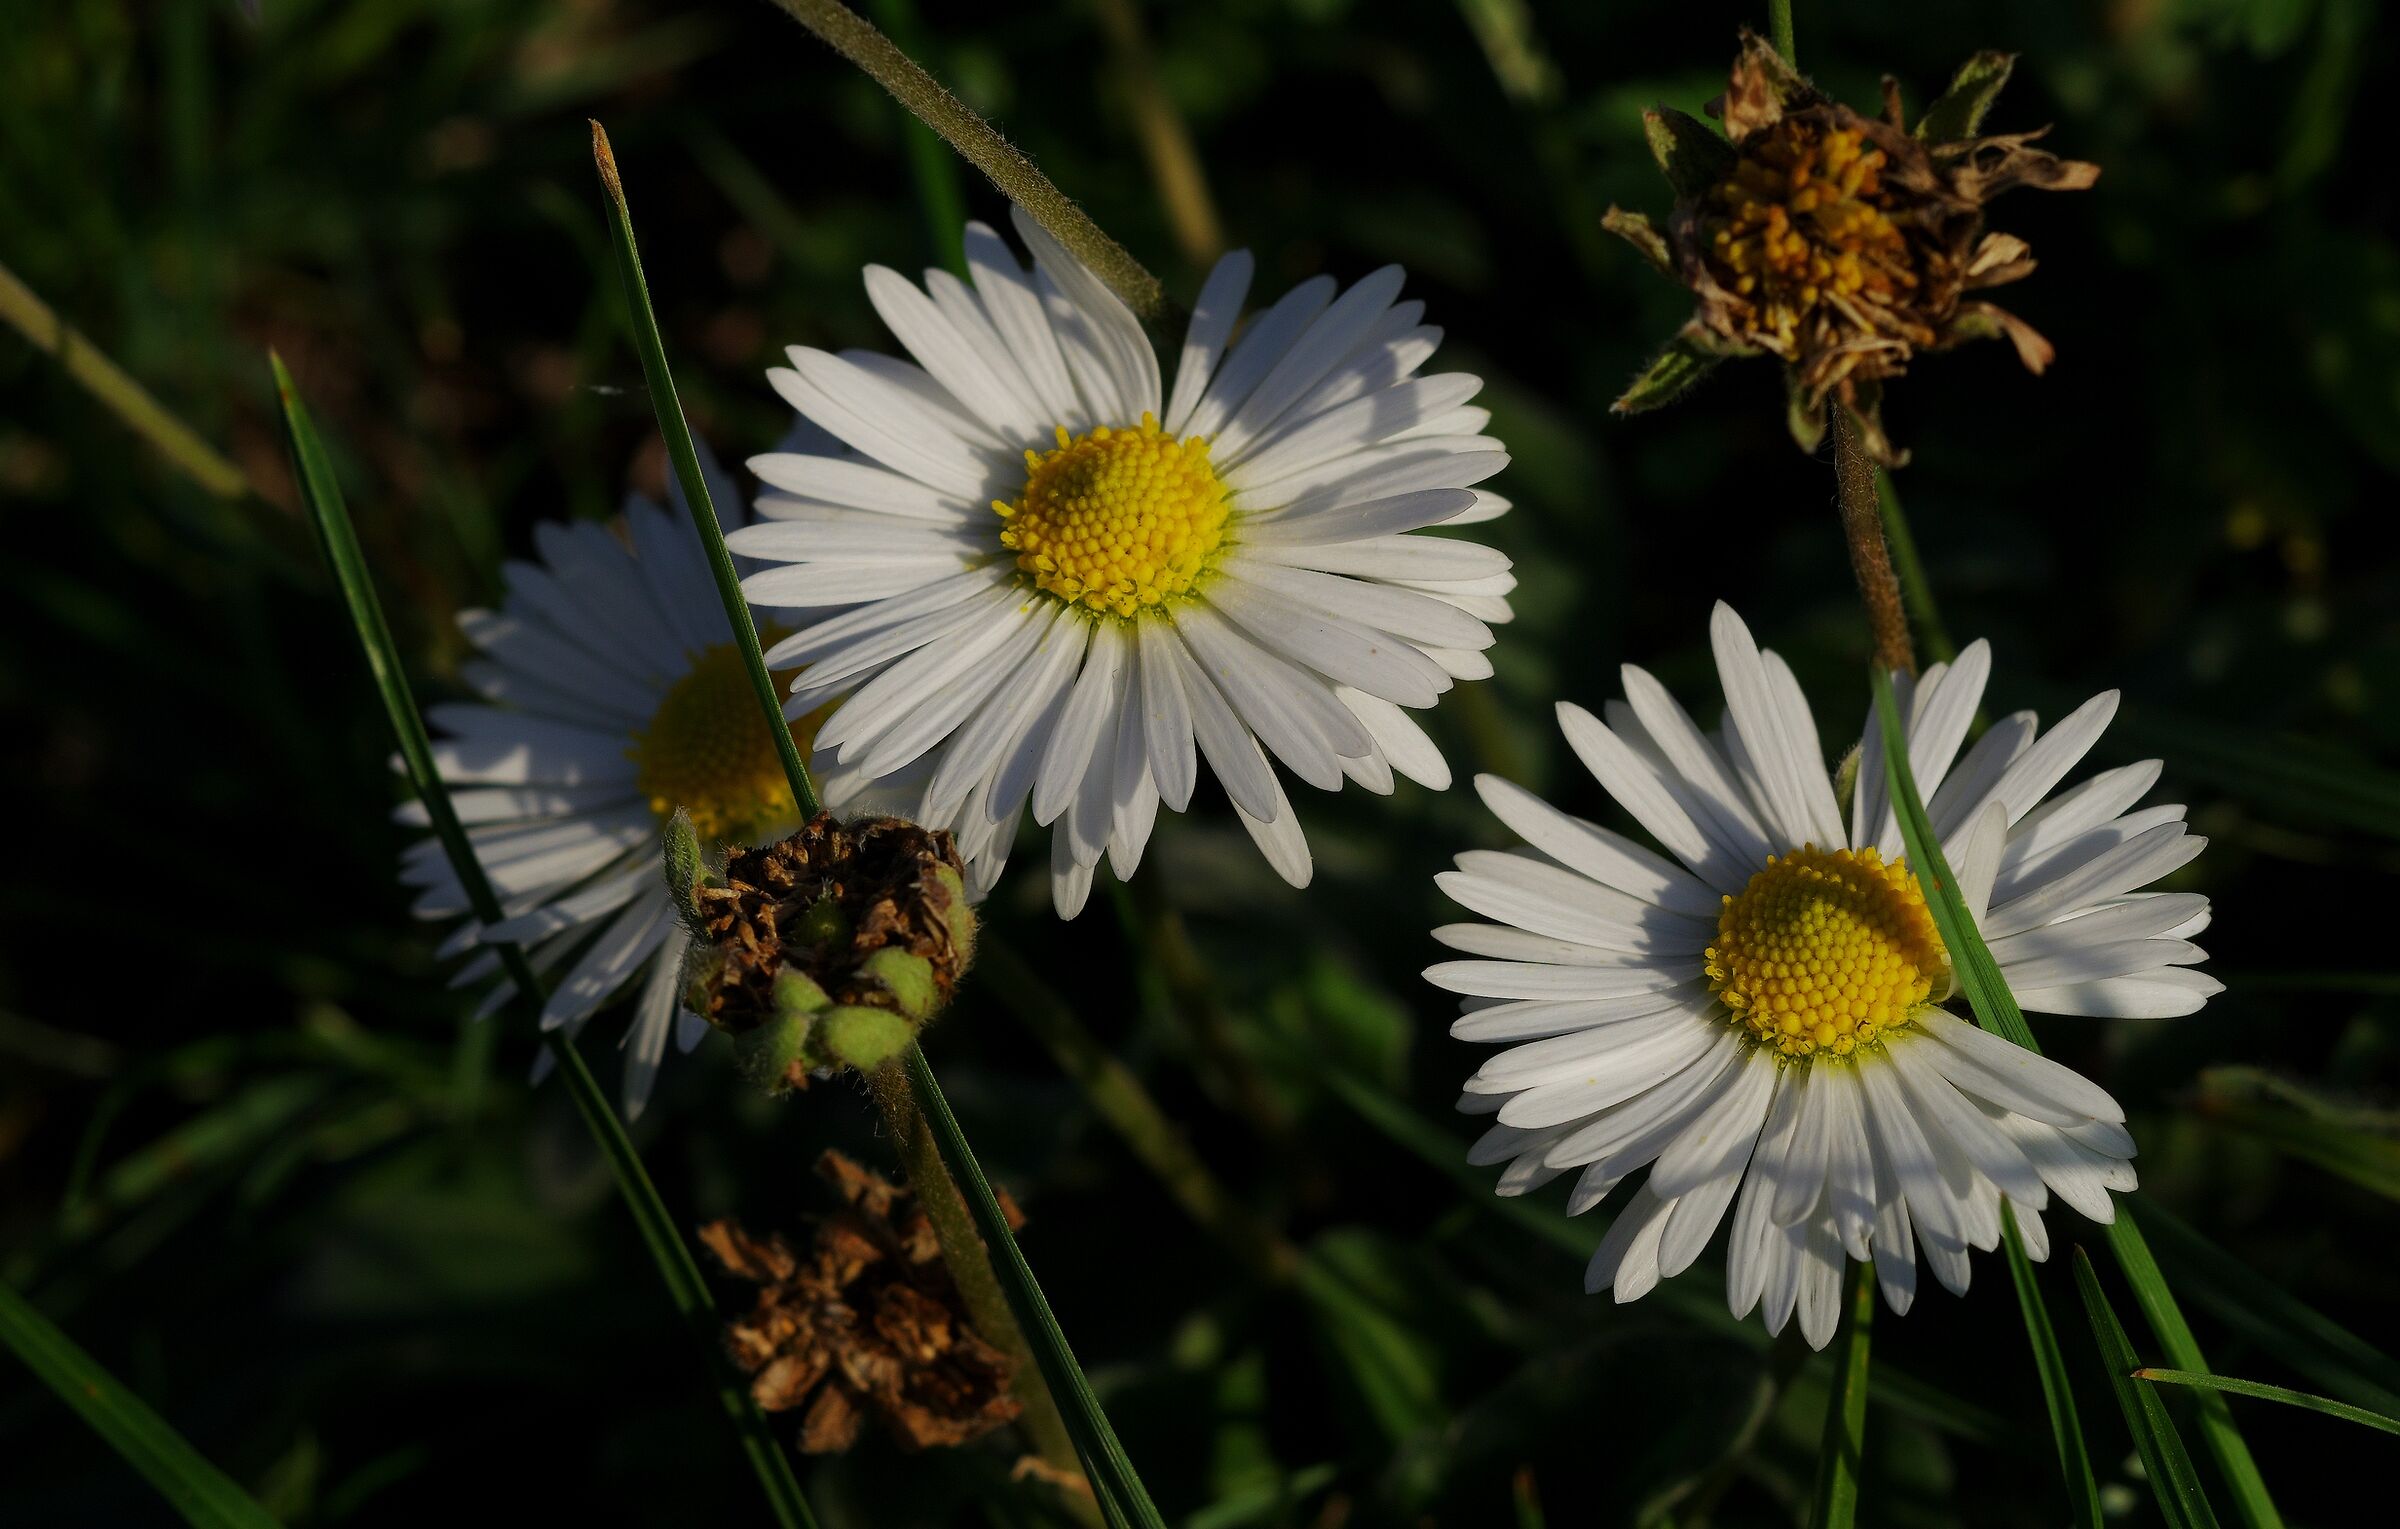 The Daisies...